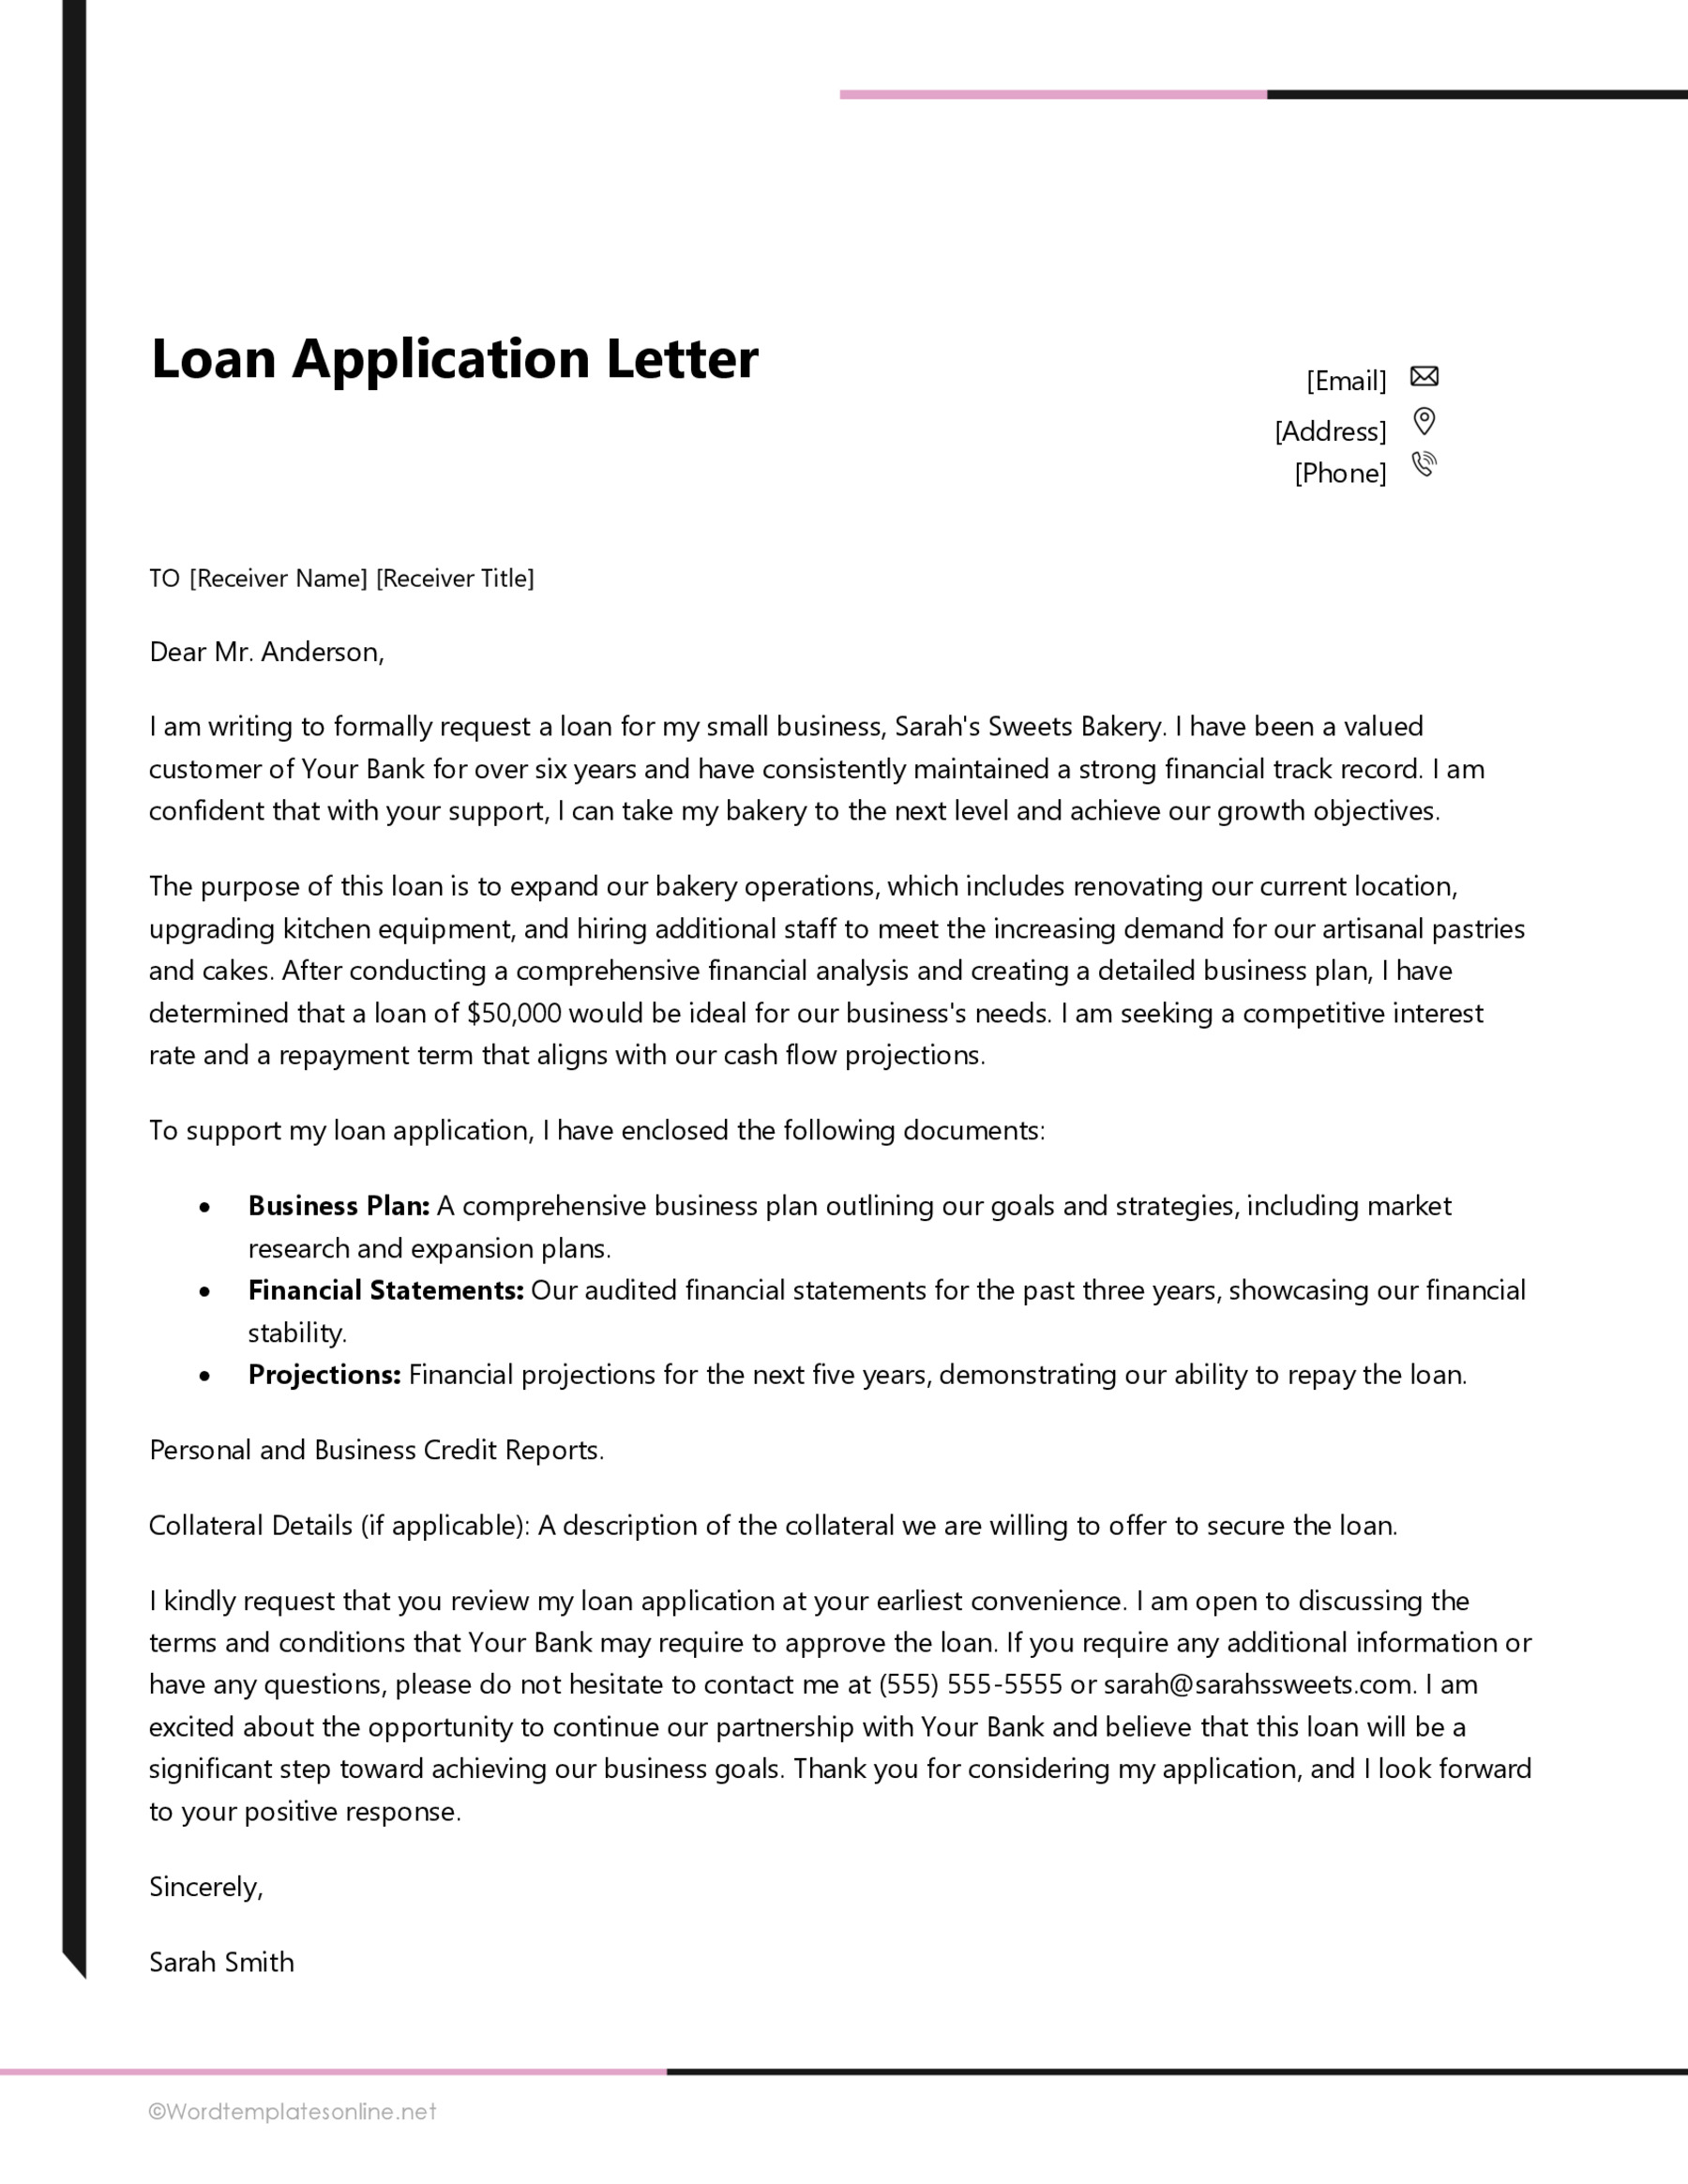 Editable Loan Application Letter Template in Word